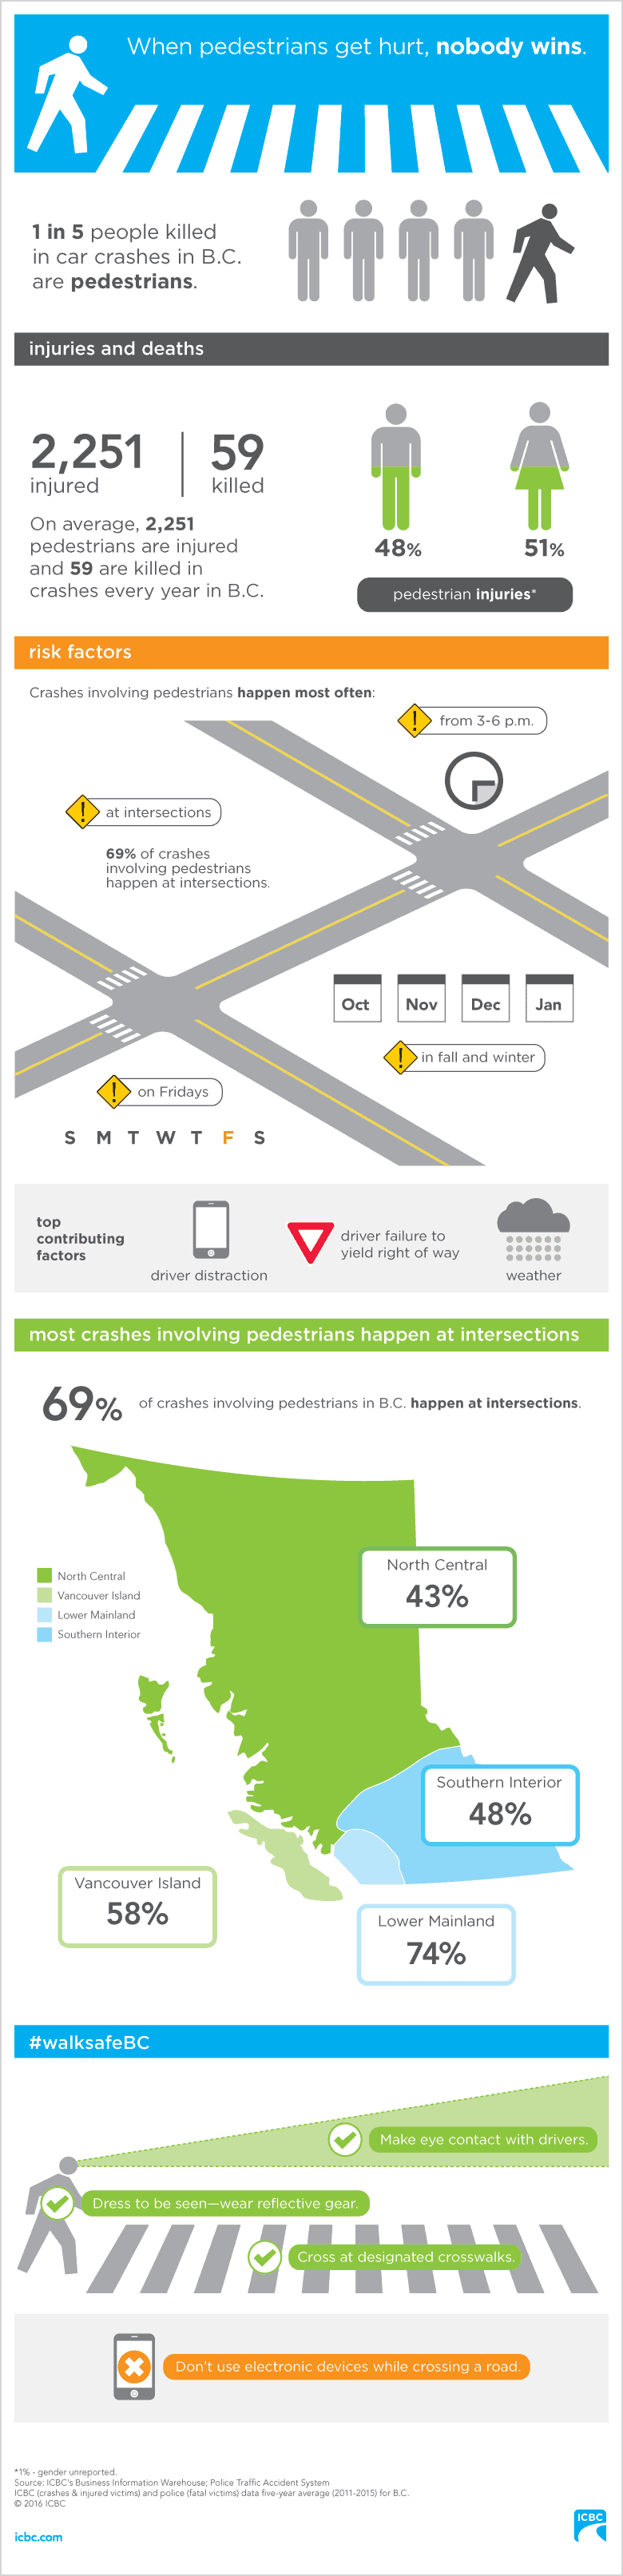 icbc-pedestrian-safety-infographic